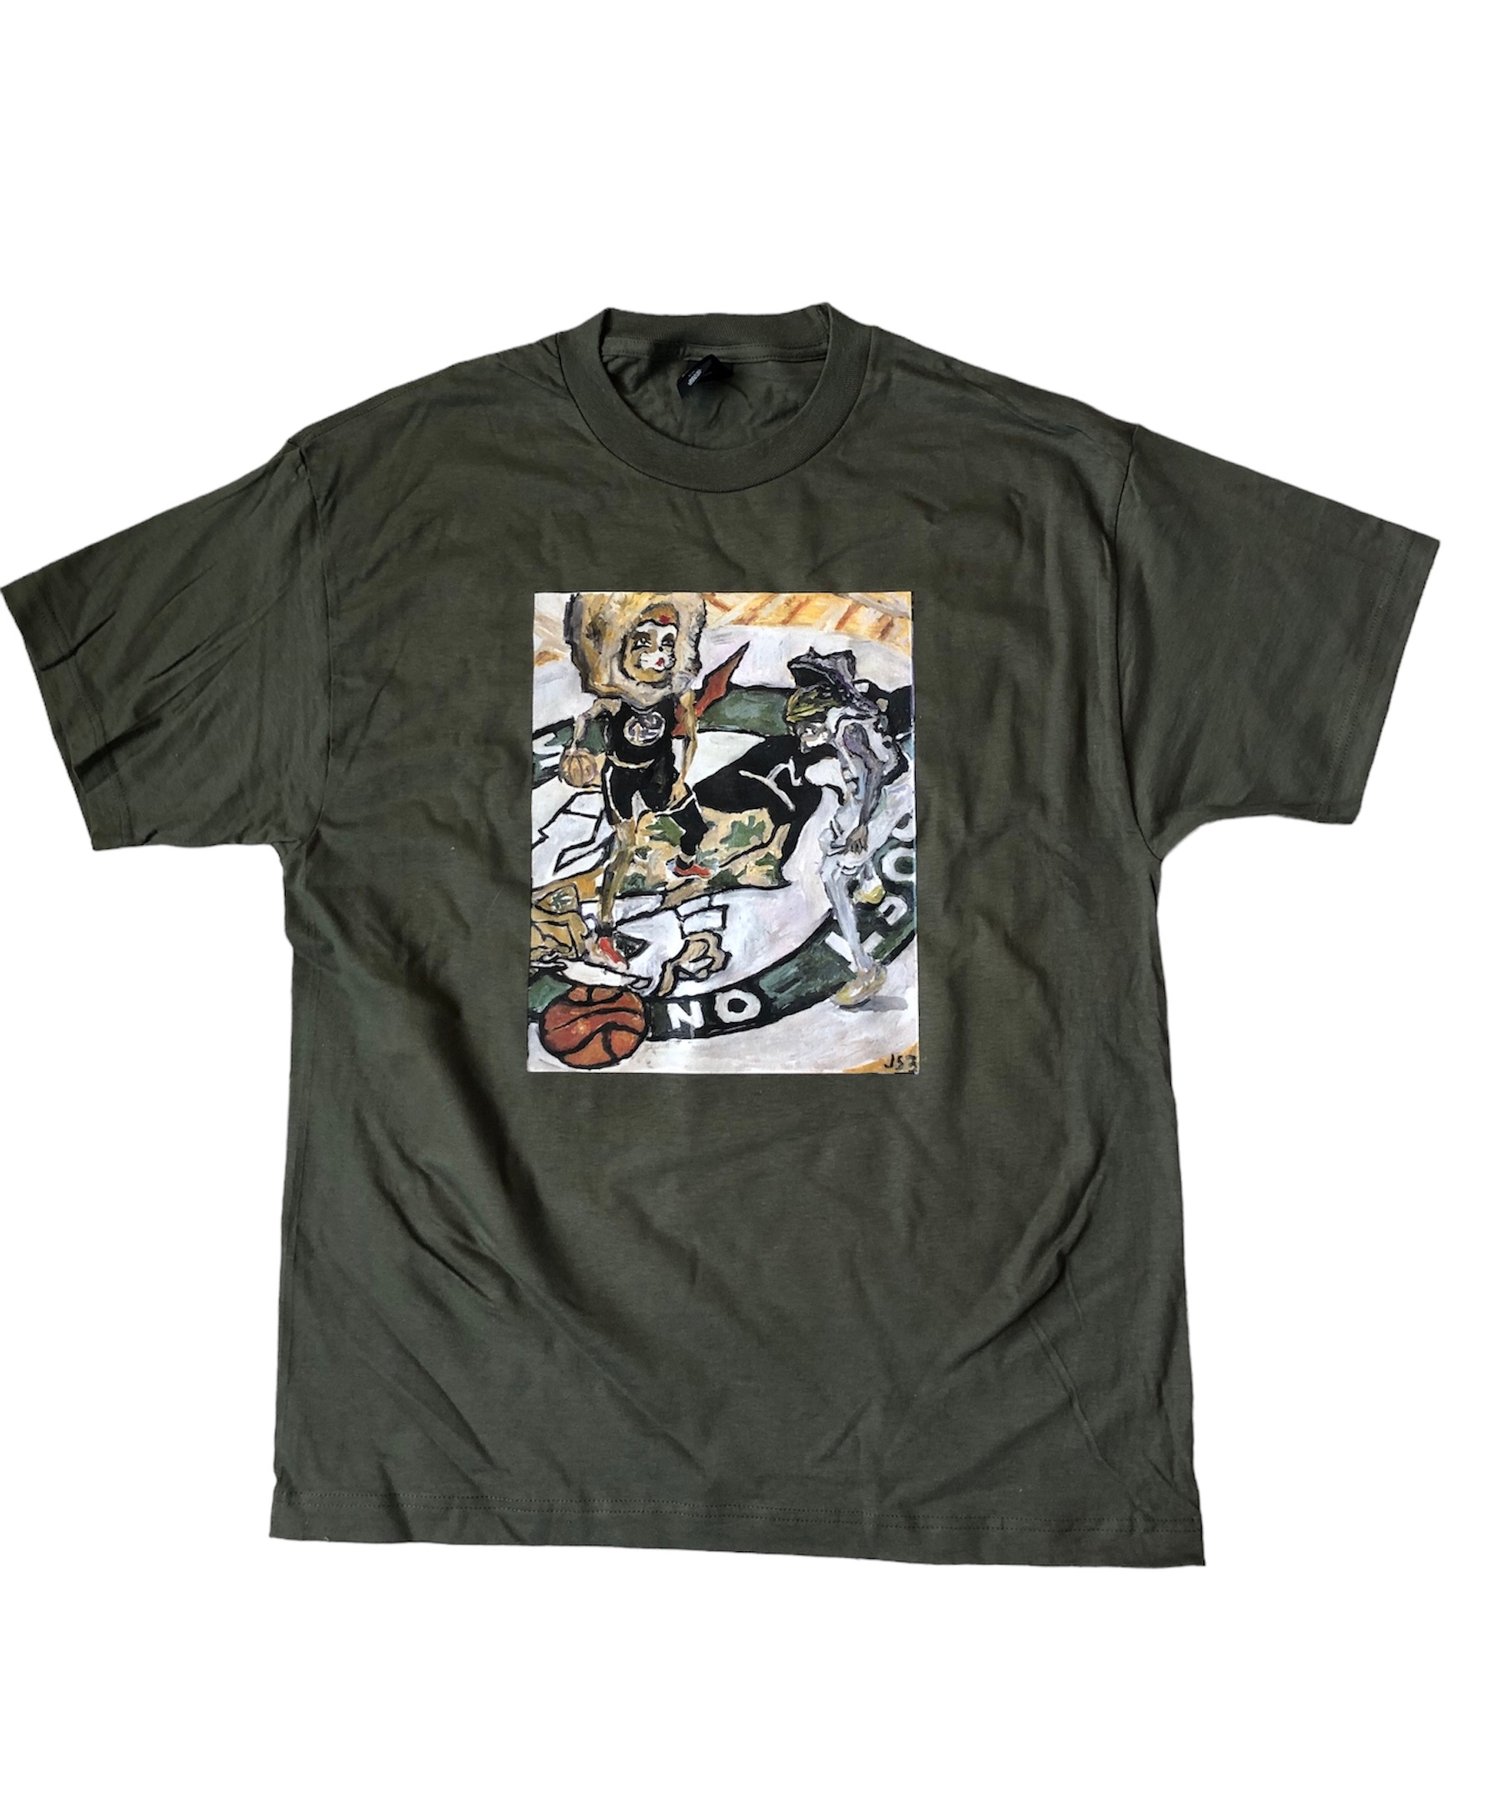 The Lion and the Frog T-shirt